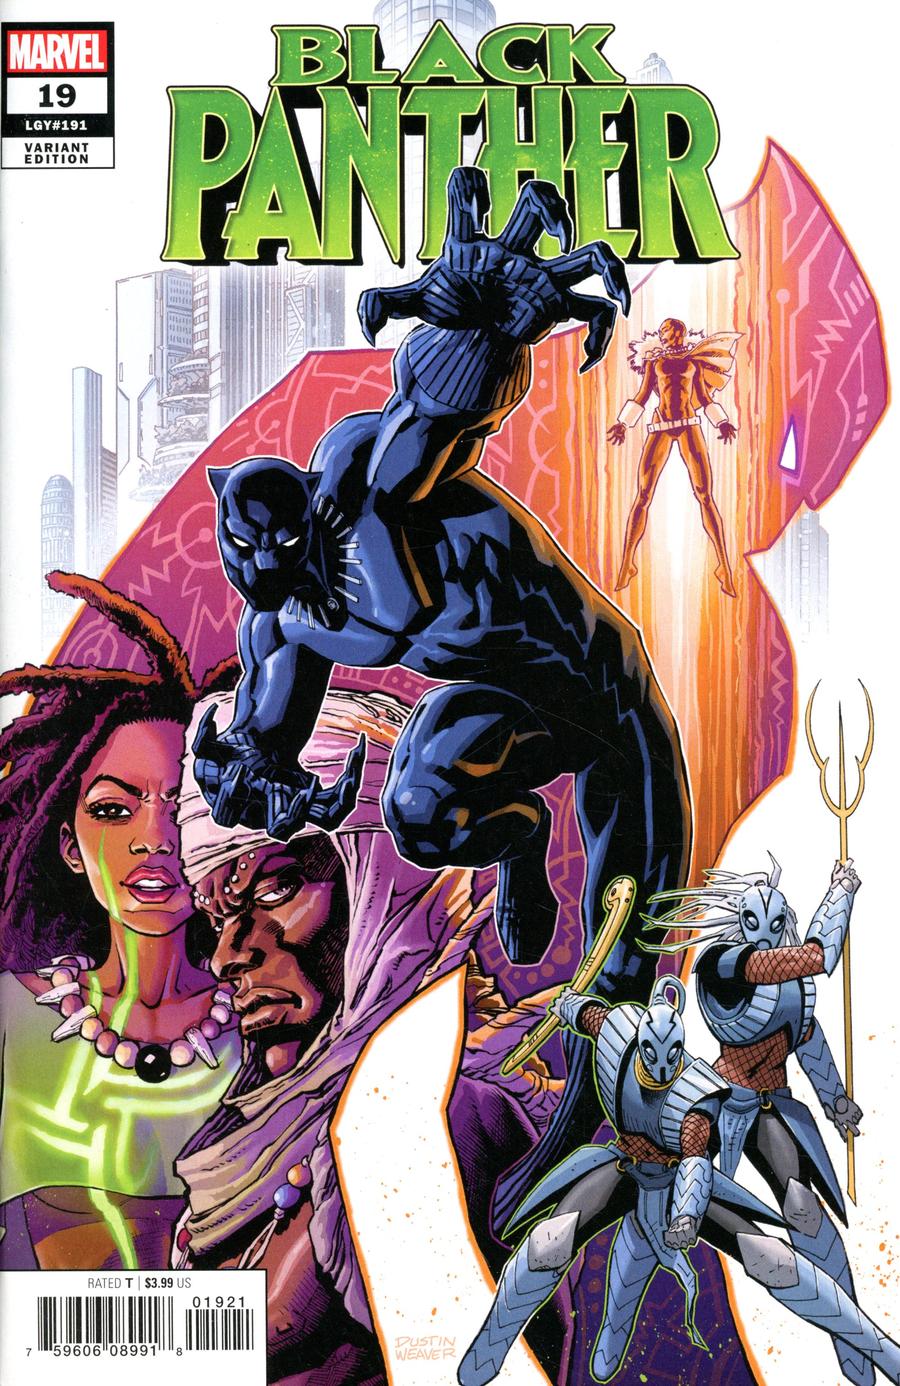 Black Panther Vol 7 #19 Cover B Variant Dustin Weaver Cover